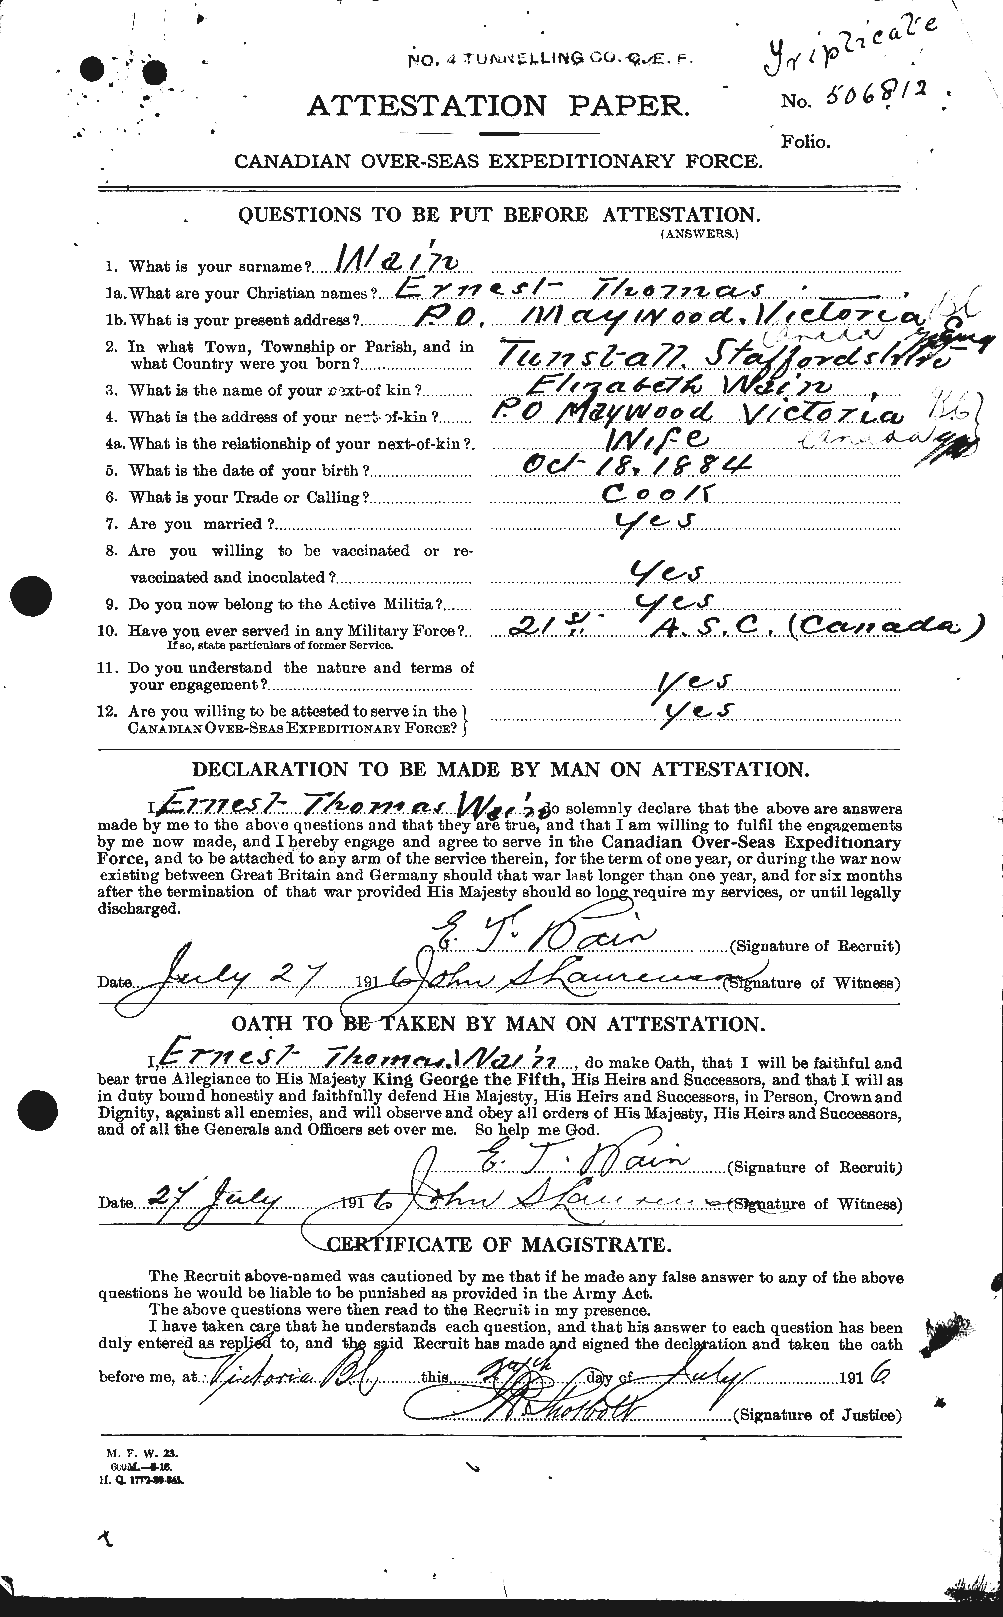 Personnel Records of the First World War - CEF 654123a